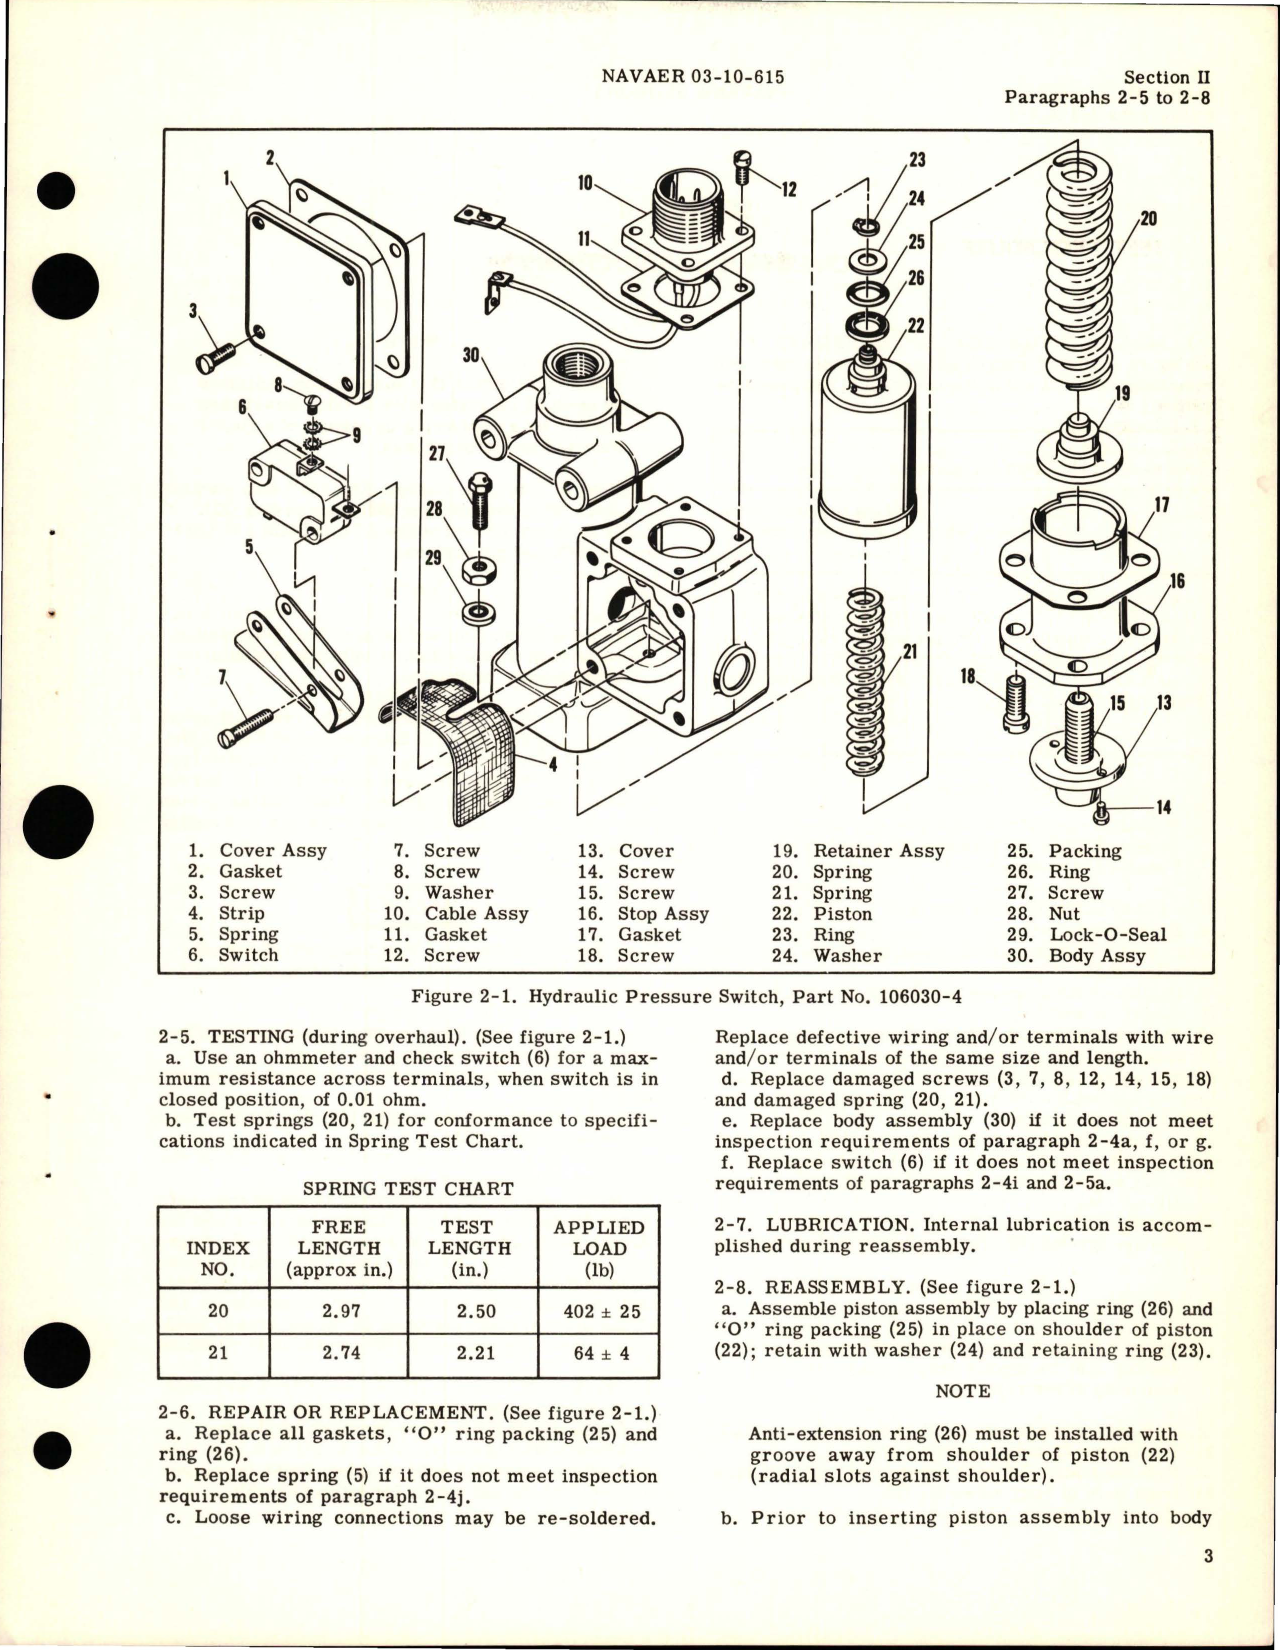 Sample page 5 from AirCorps Library document: Overhaul Instructions for Hydraulic and Pneumatic Pressure Switches 